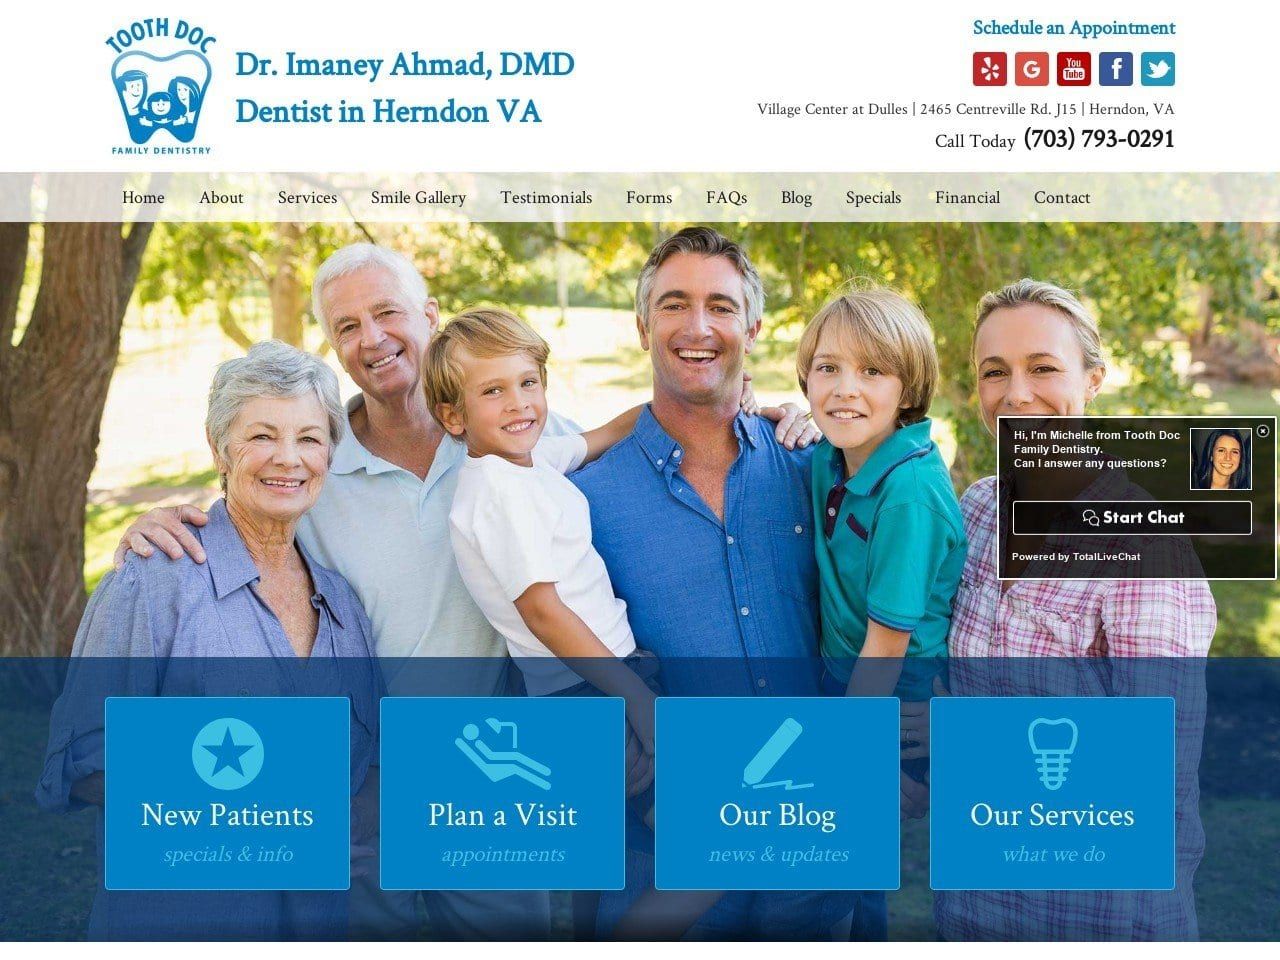 Tooth Doc Family Dentist Website Screenshot from toothdocdental.com